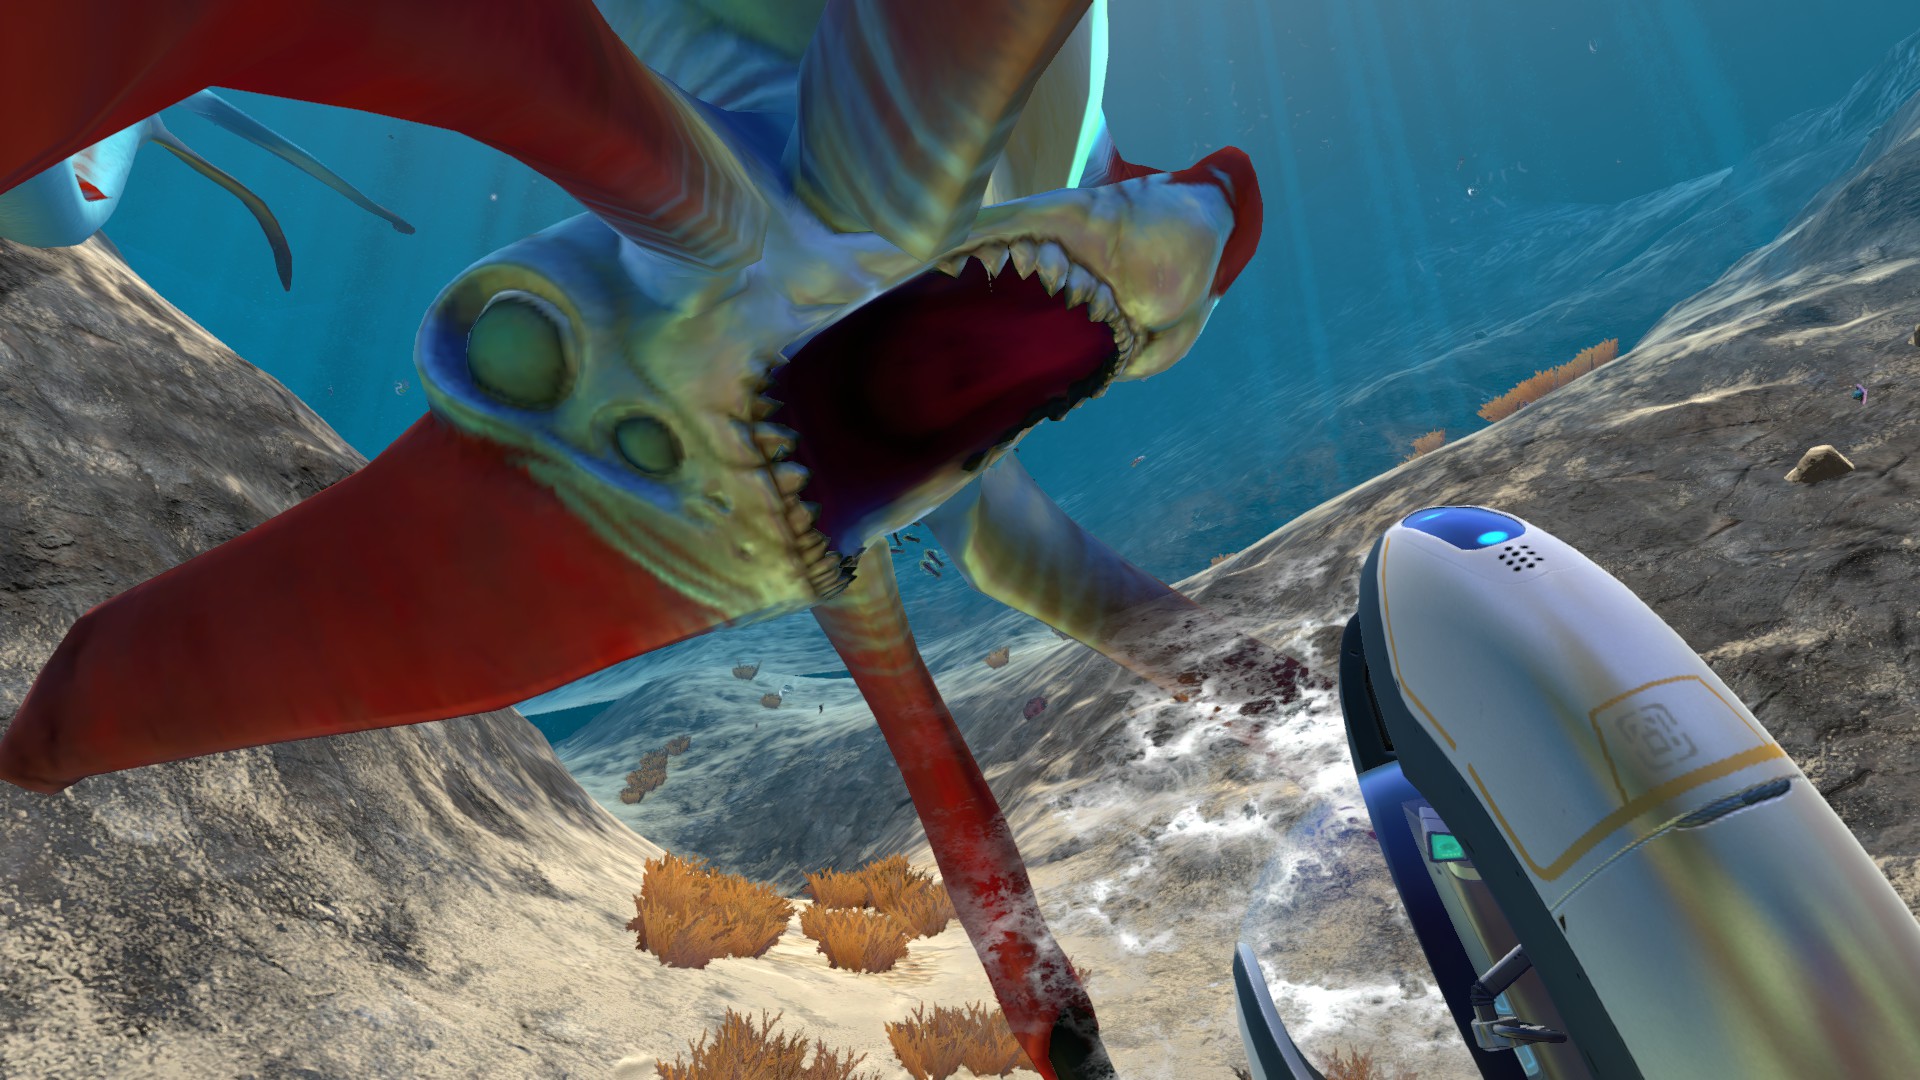 subnautica reaper leviathan sise command